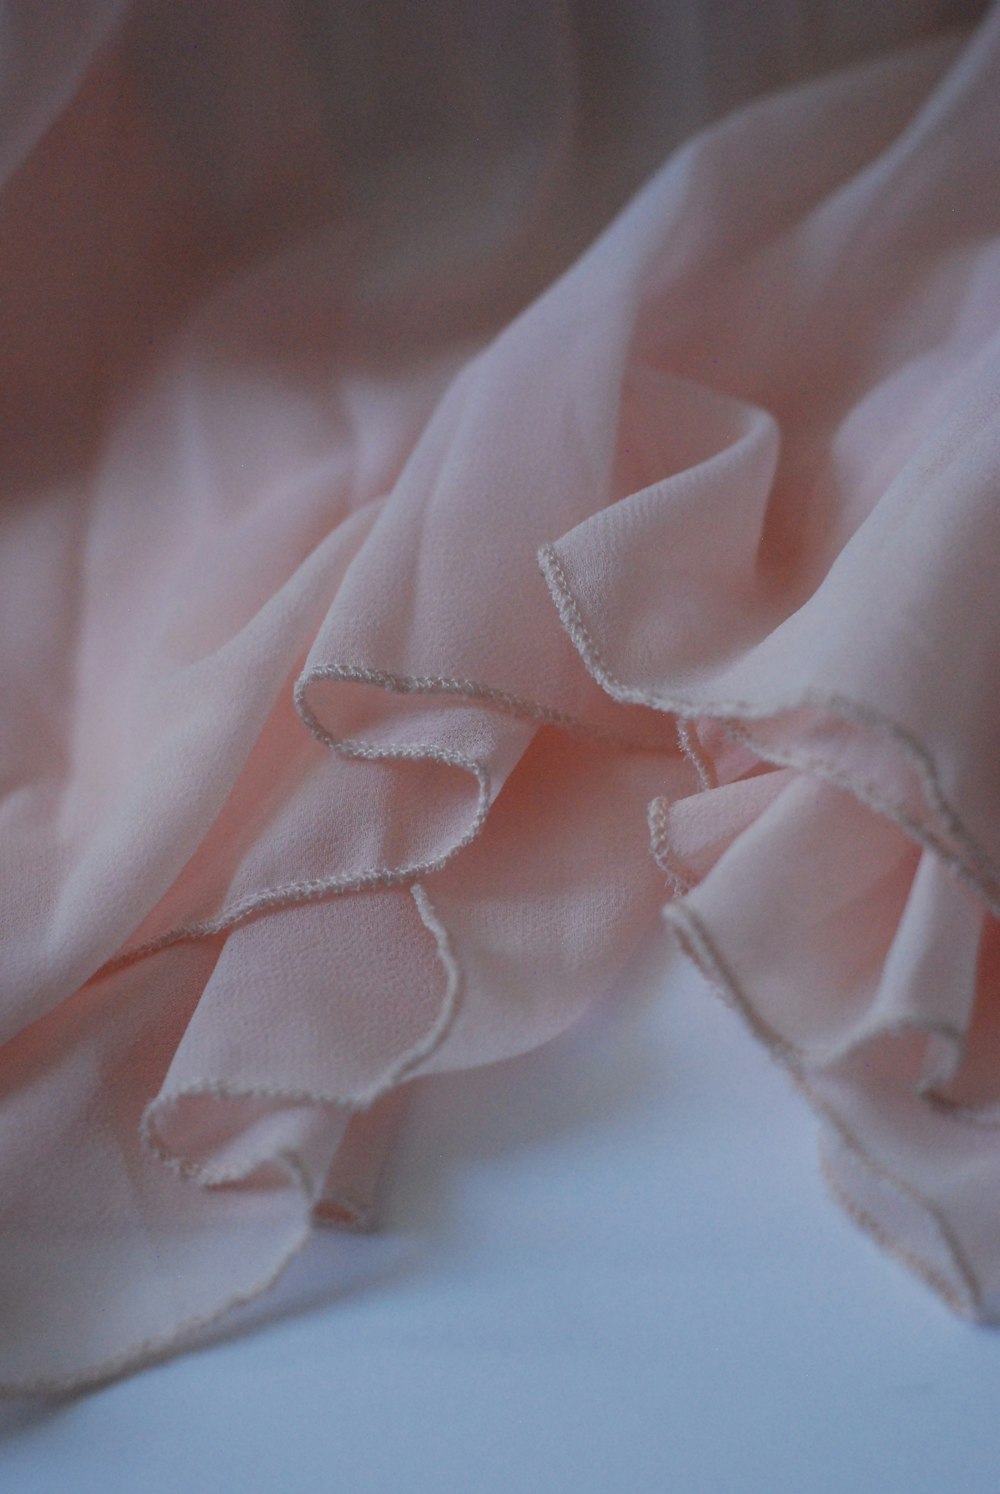 Pink Fabric Pictures  Download Free Images on Unsplash